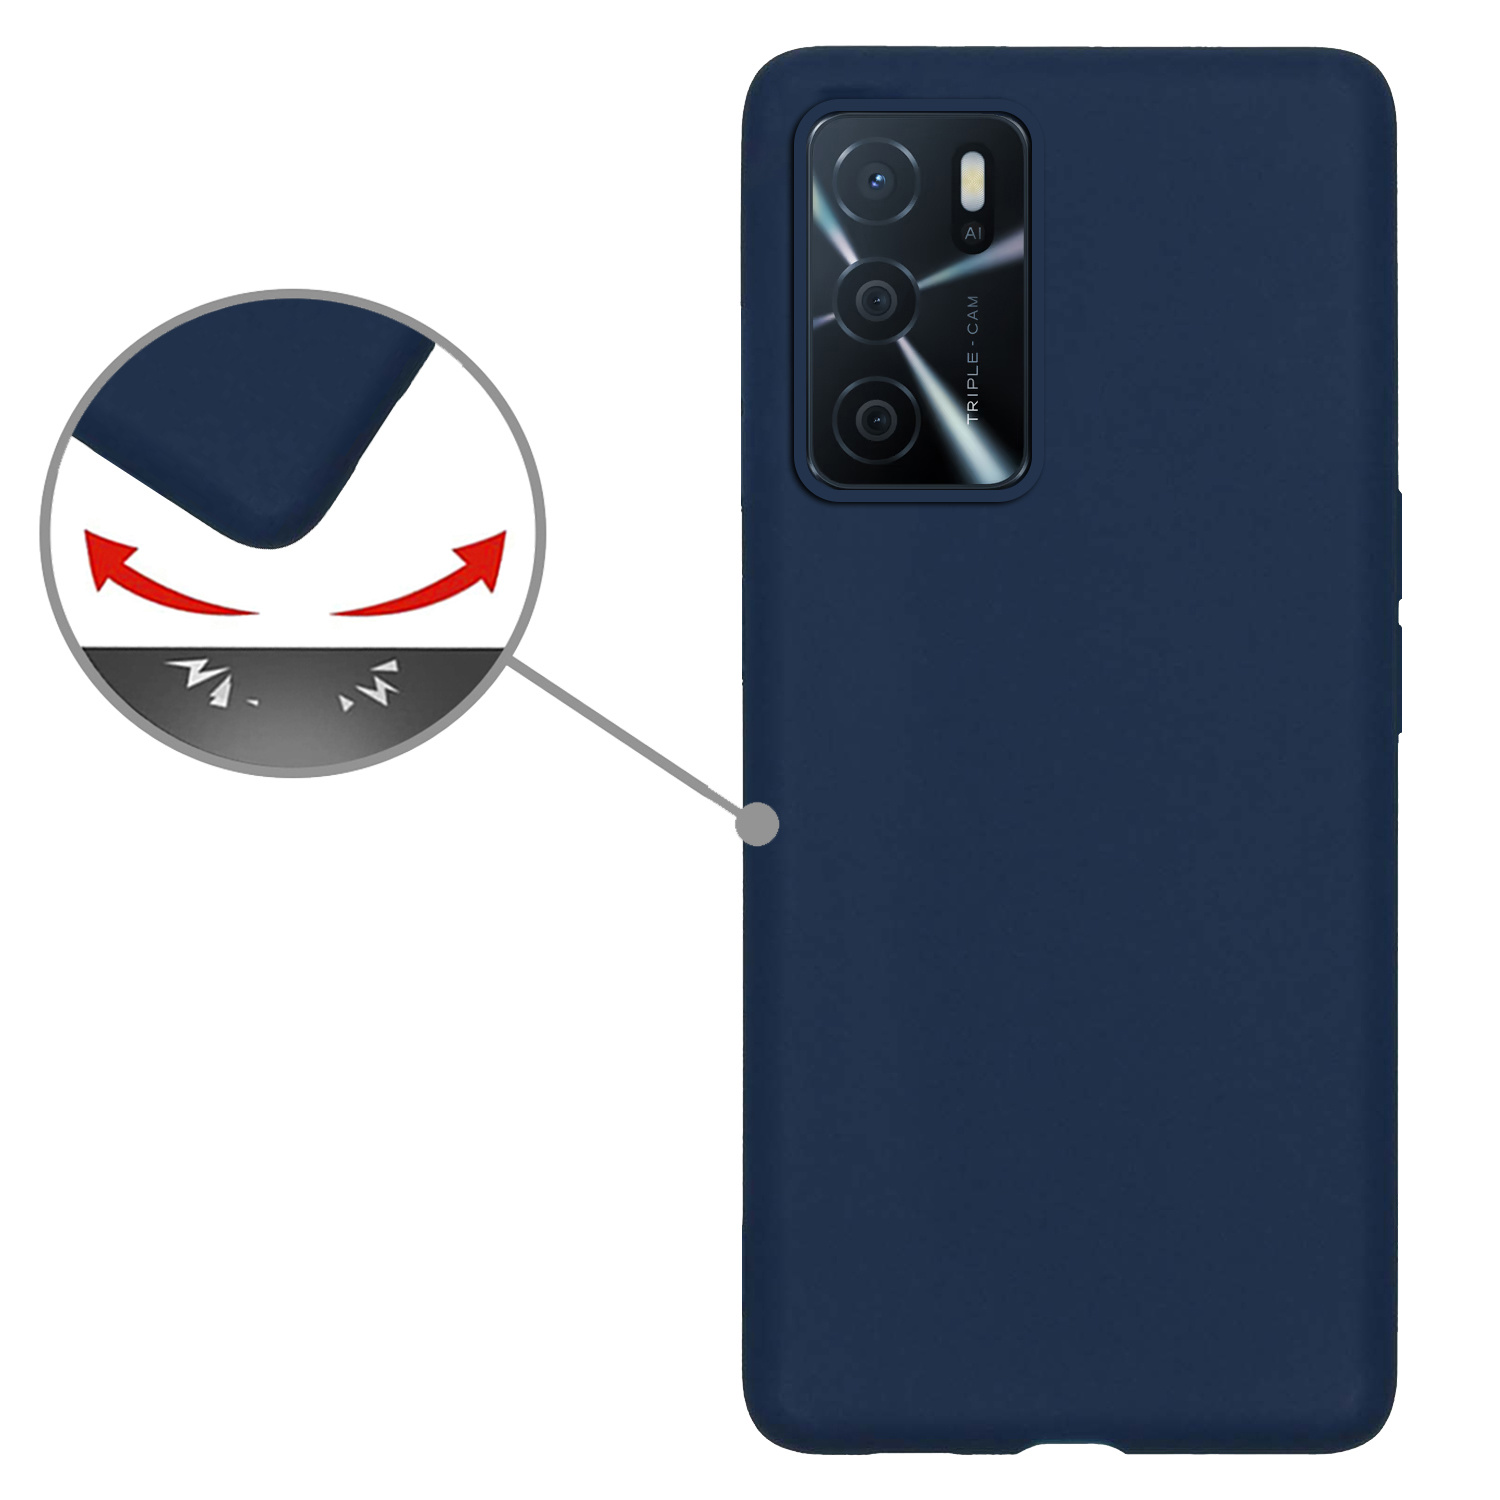 Nomfy OPPO A16 Hoes Cover Siliconen Case - OPPO A16 Hoesje Case Siliconen Hoes Back Cover - Donker Blauw - 2 PACK